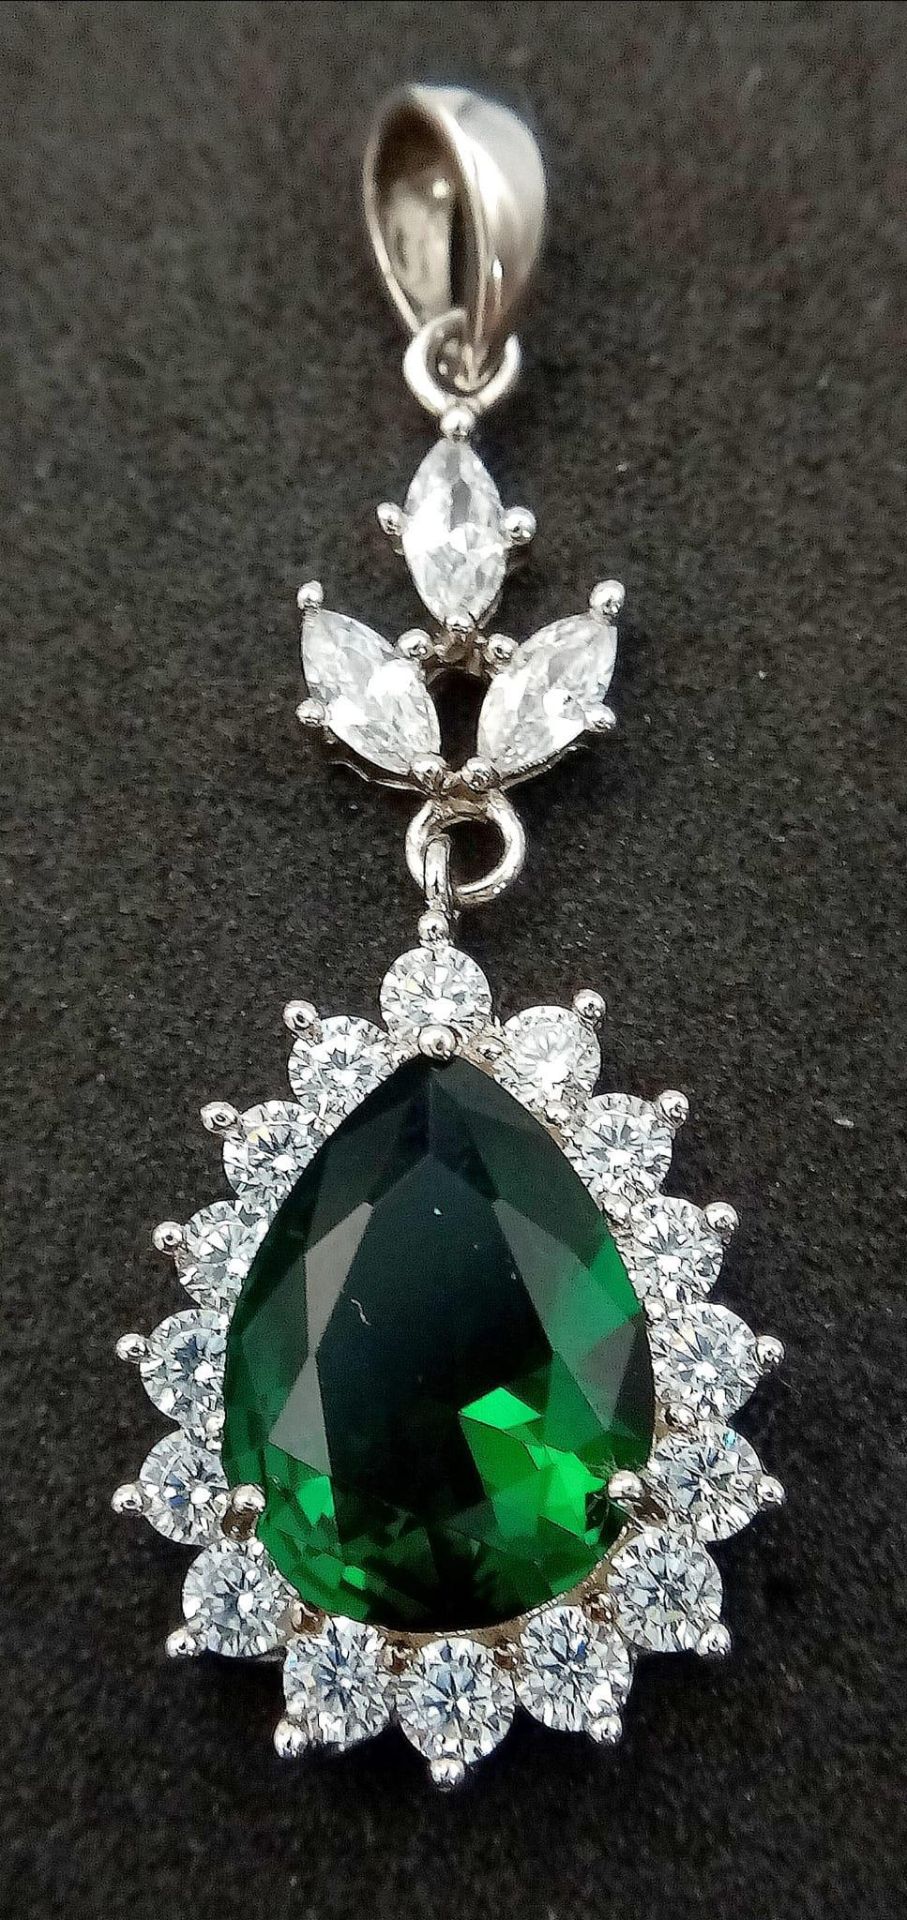 A Green and White Stone Pendant on 925 Silver.